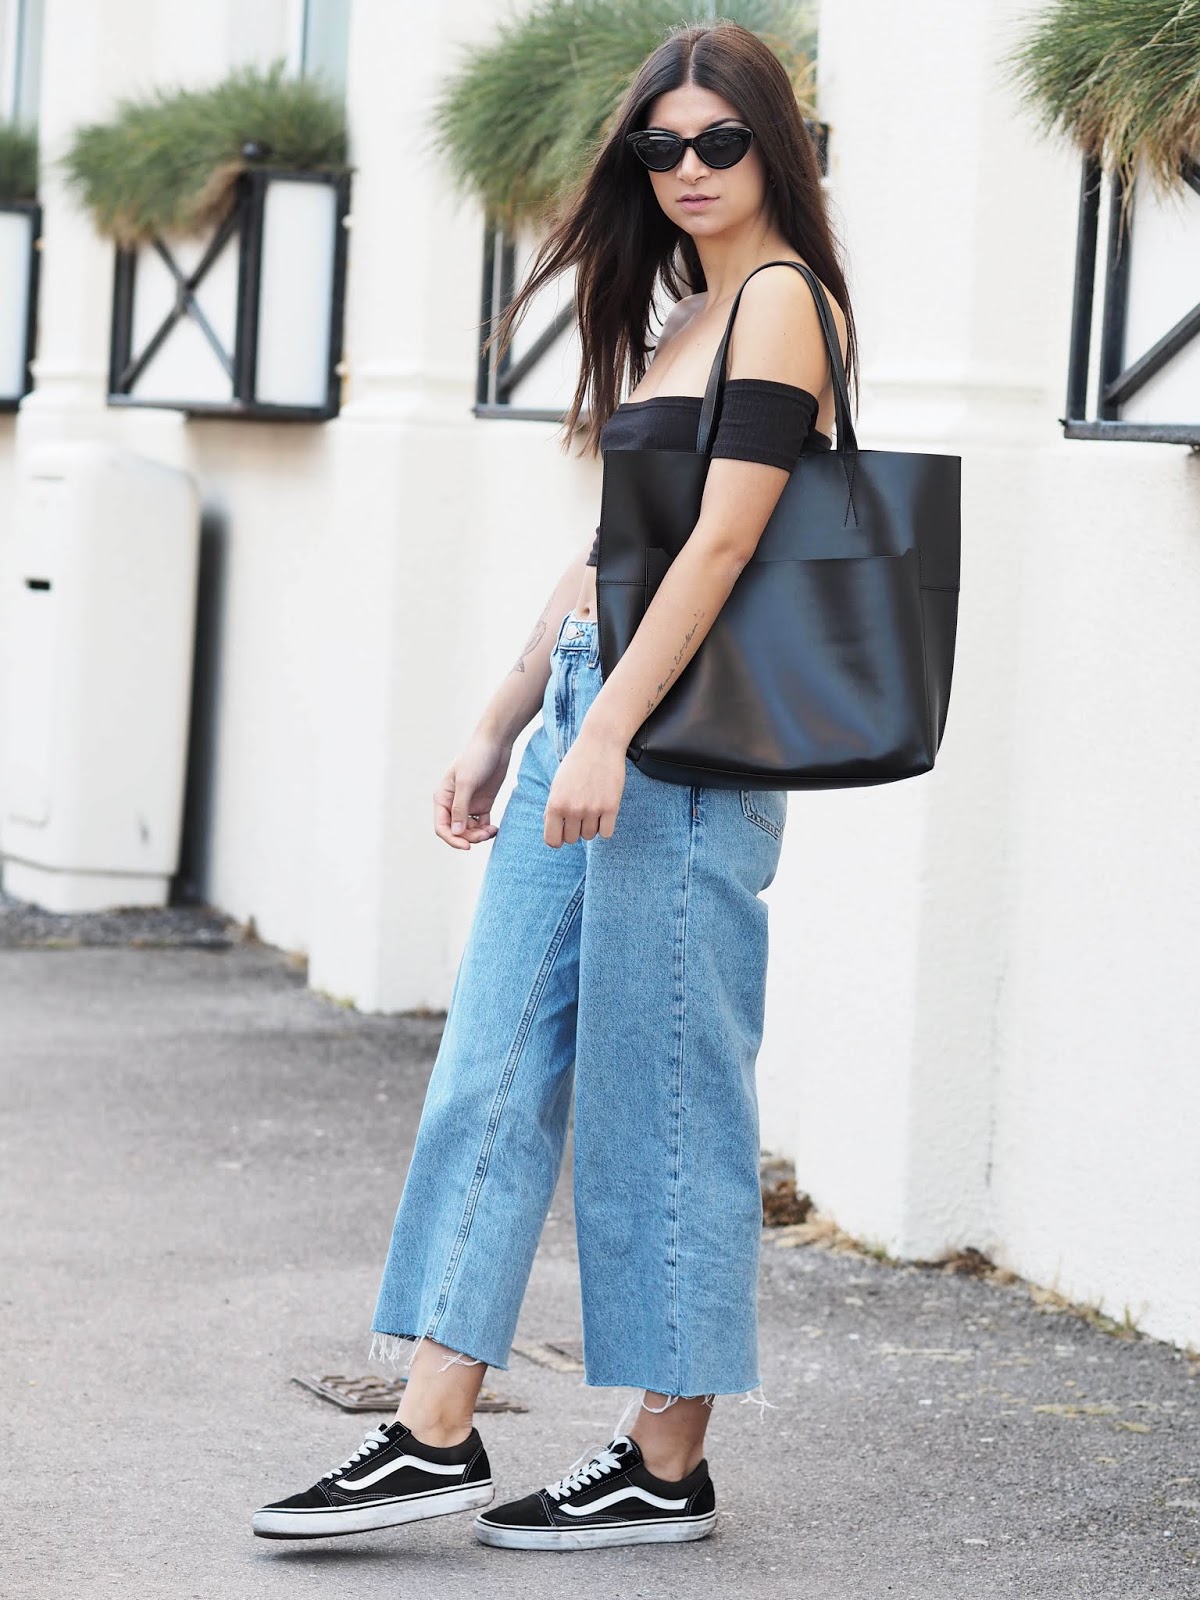 Creepers & Cupcakes: 90s Vibes - The Cropped Wide Leg Jeans You Need